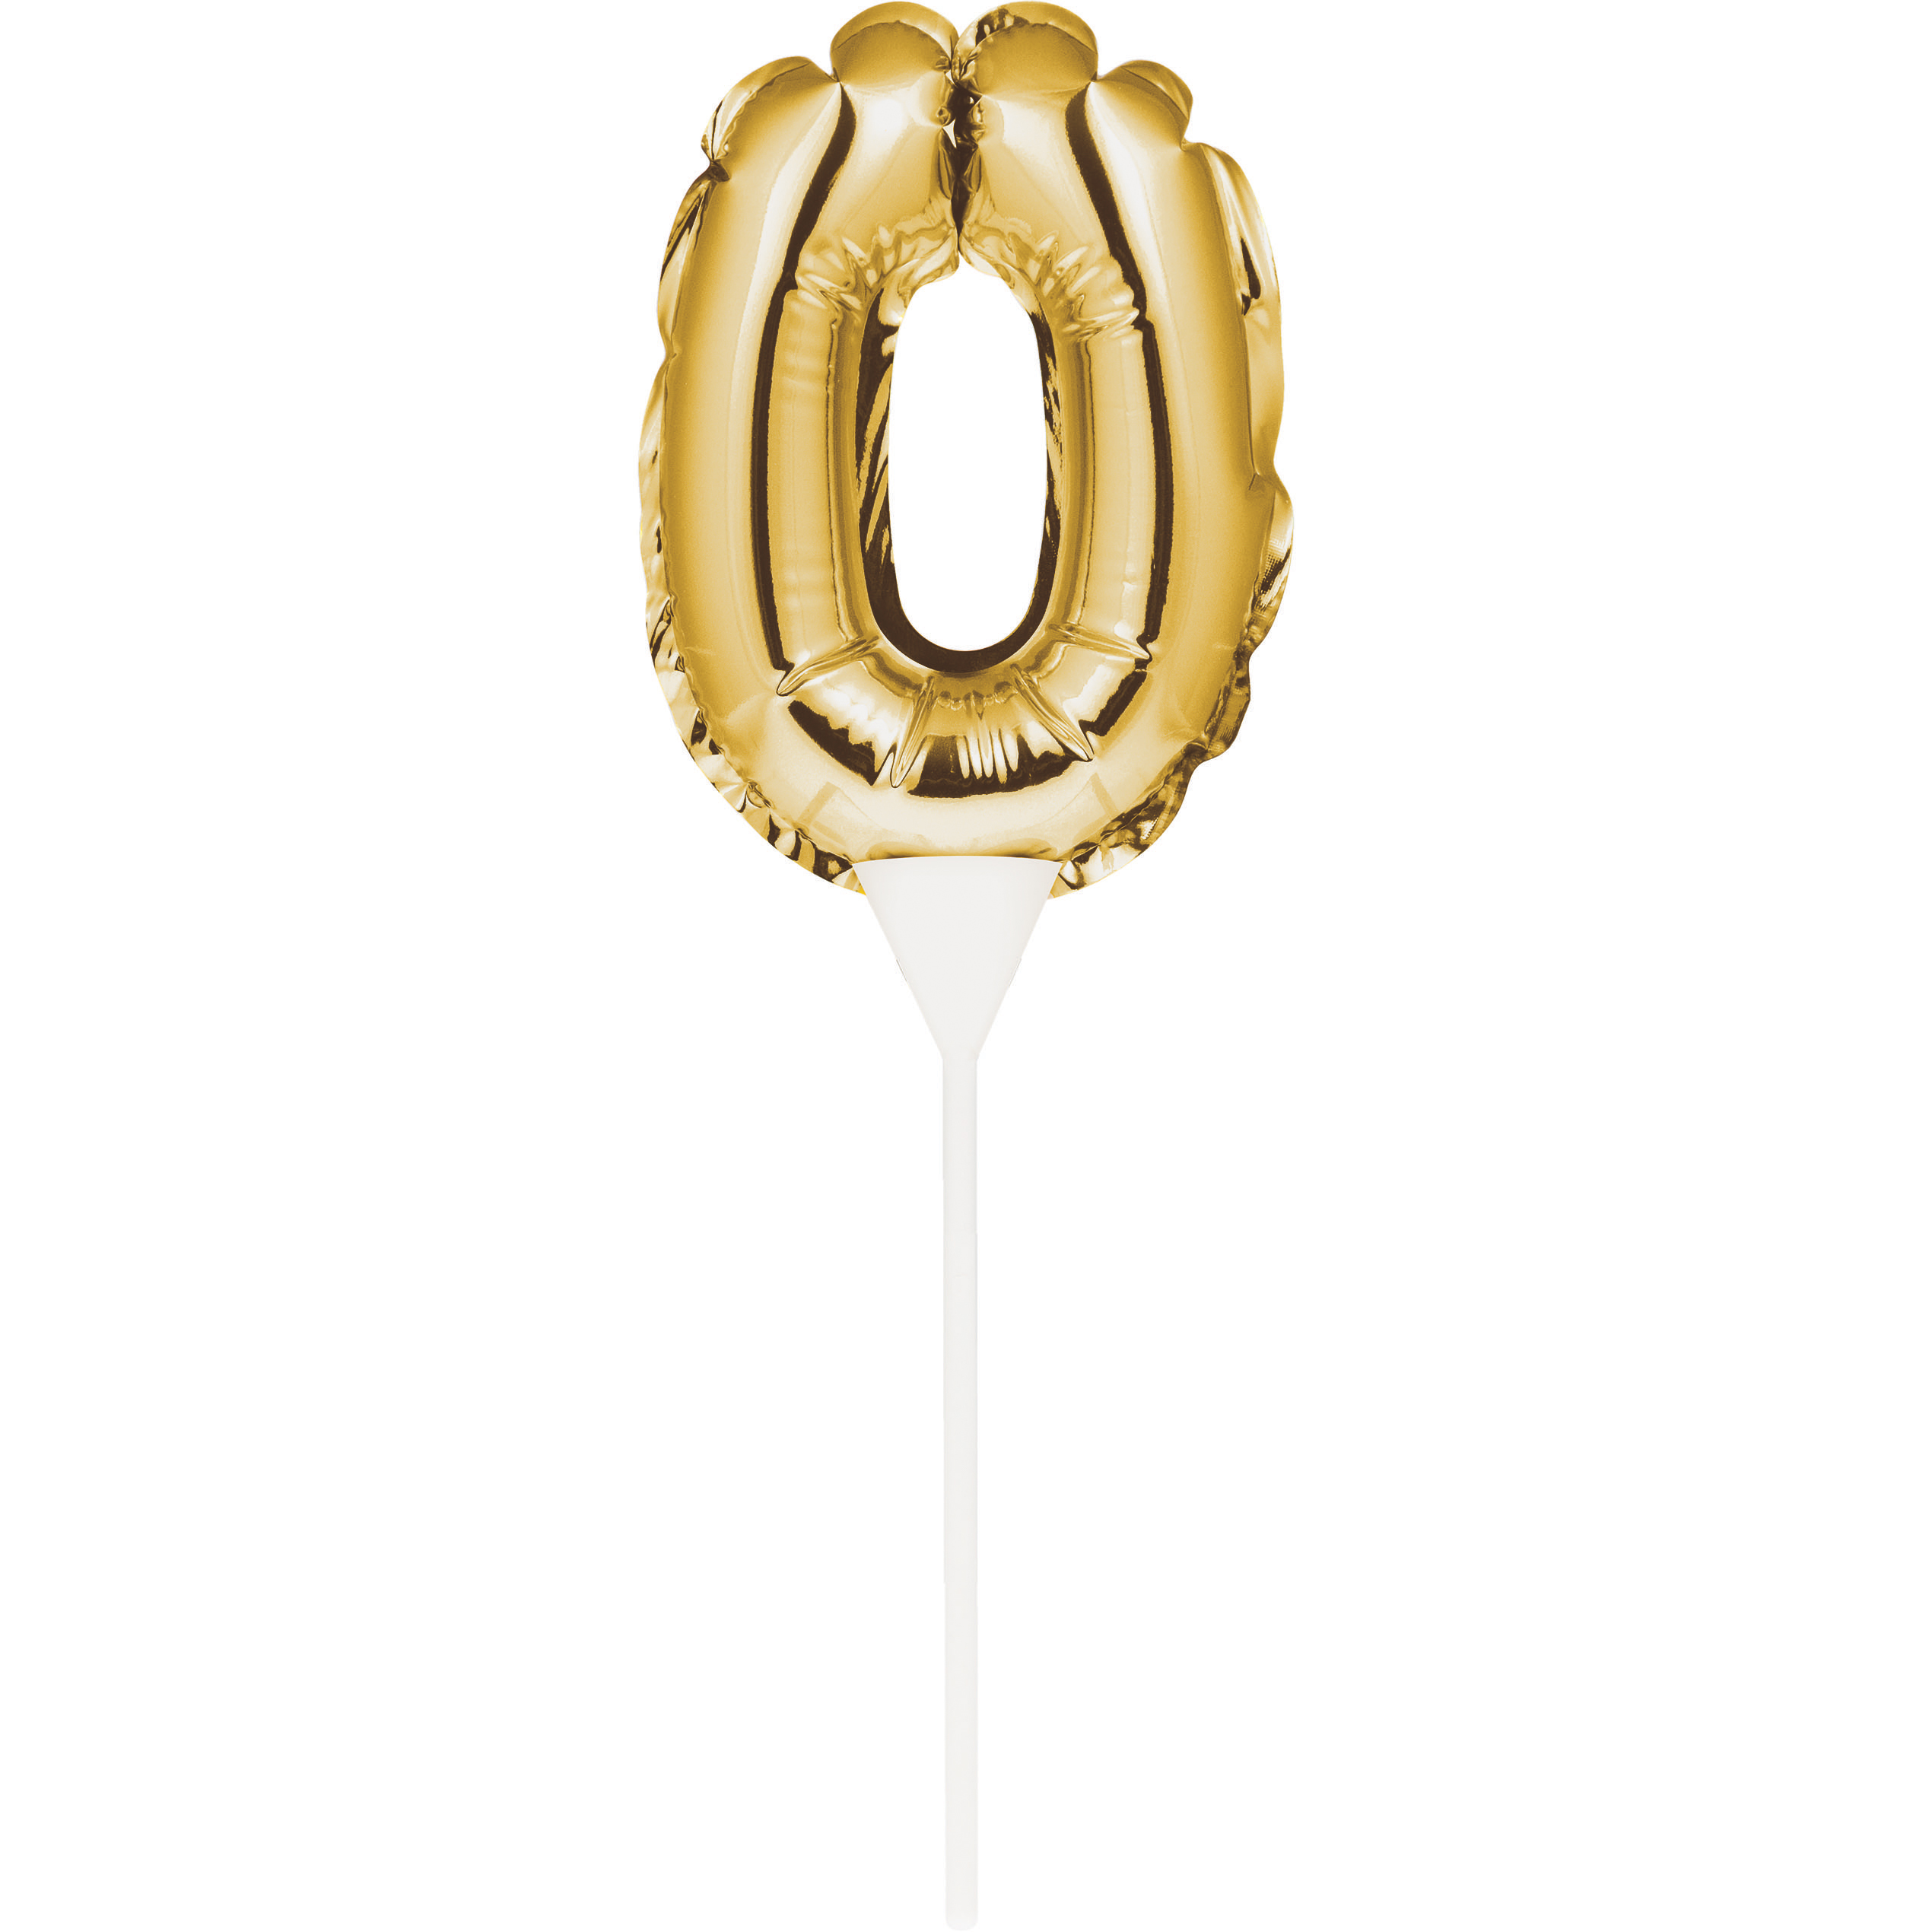 Self-Inflating Gold Mini Balloon Cake Topper - Number 0